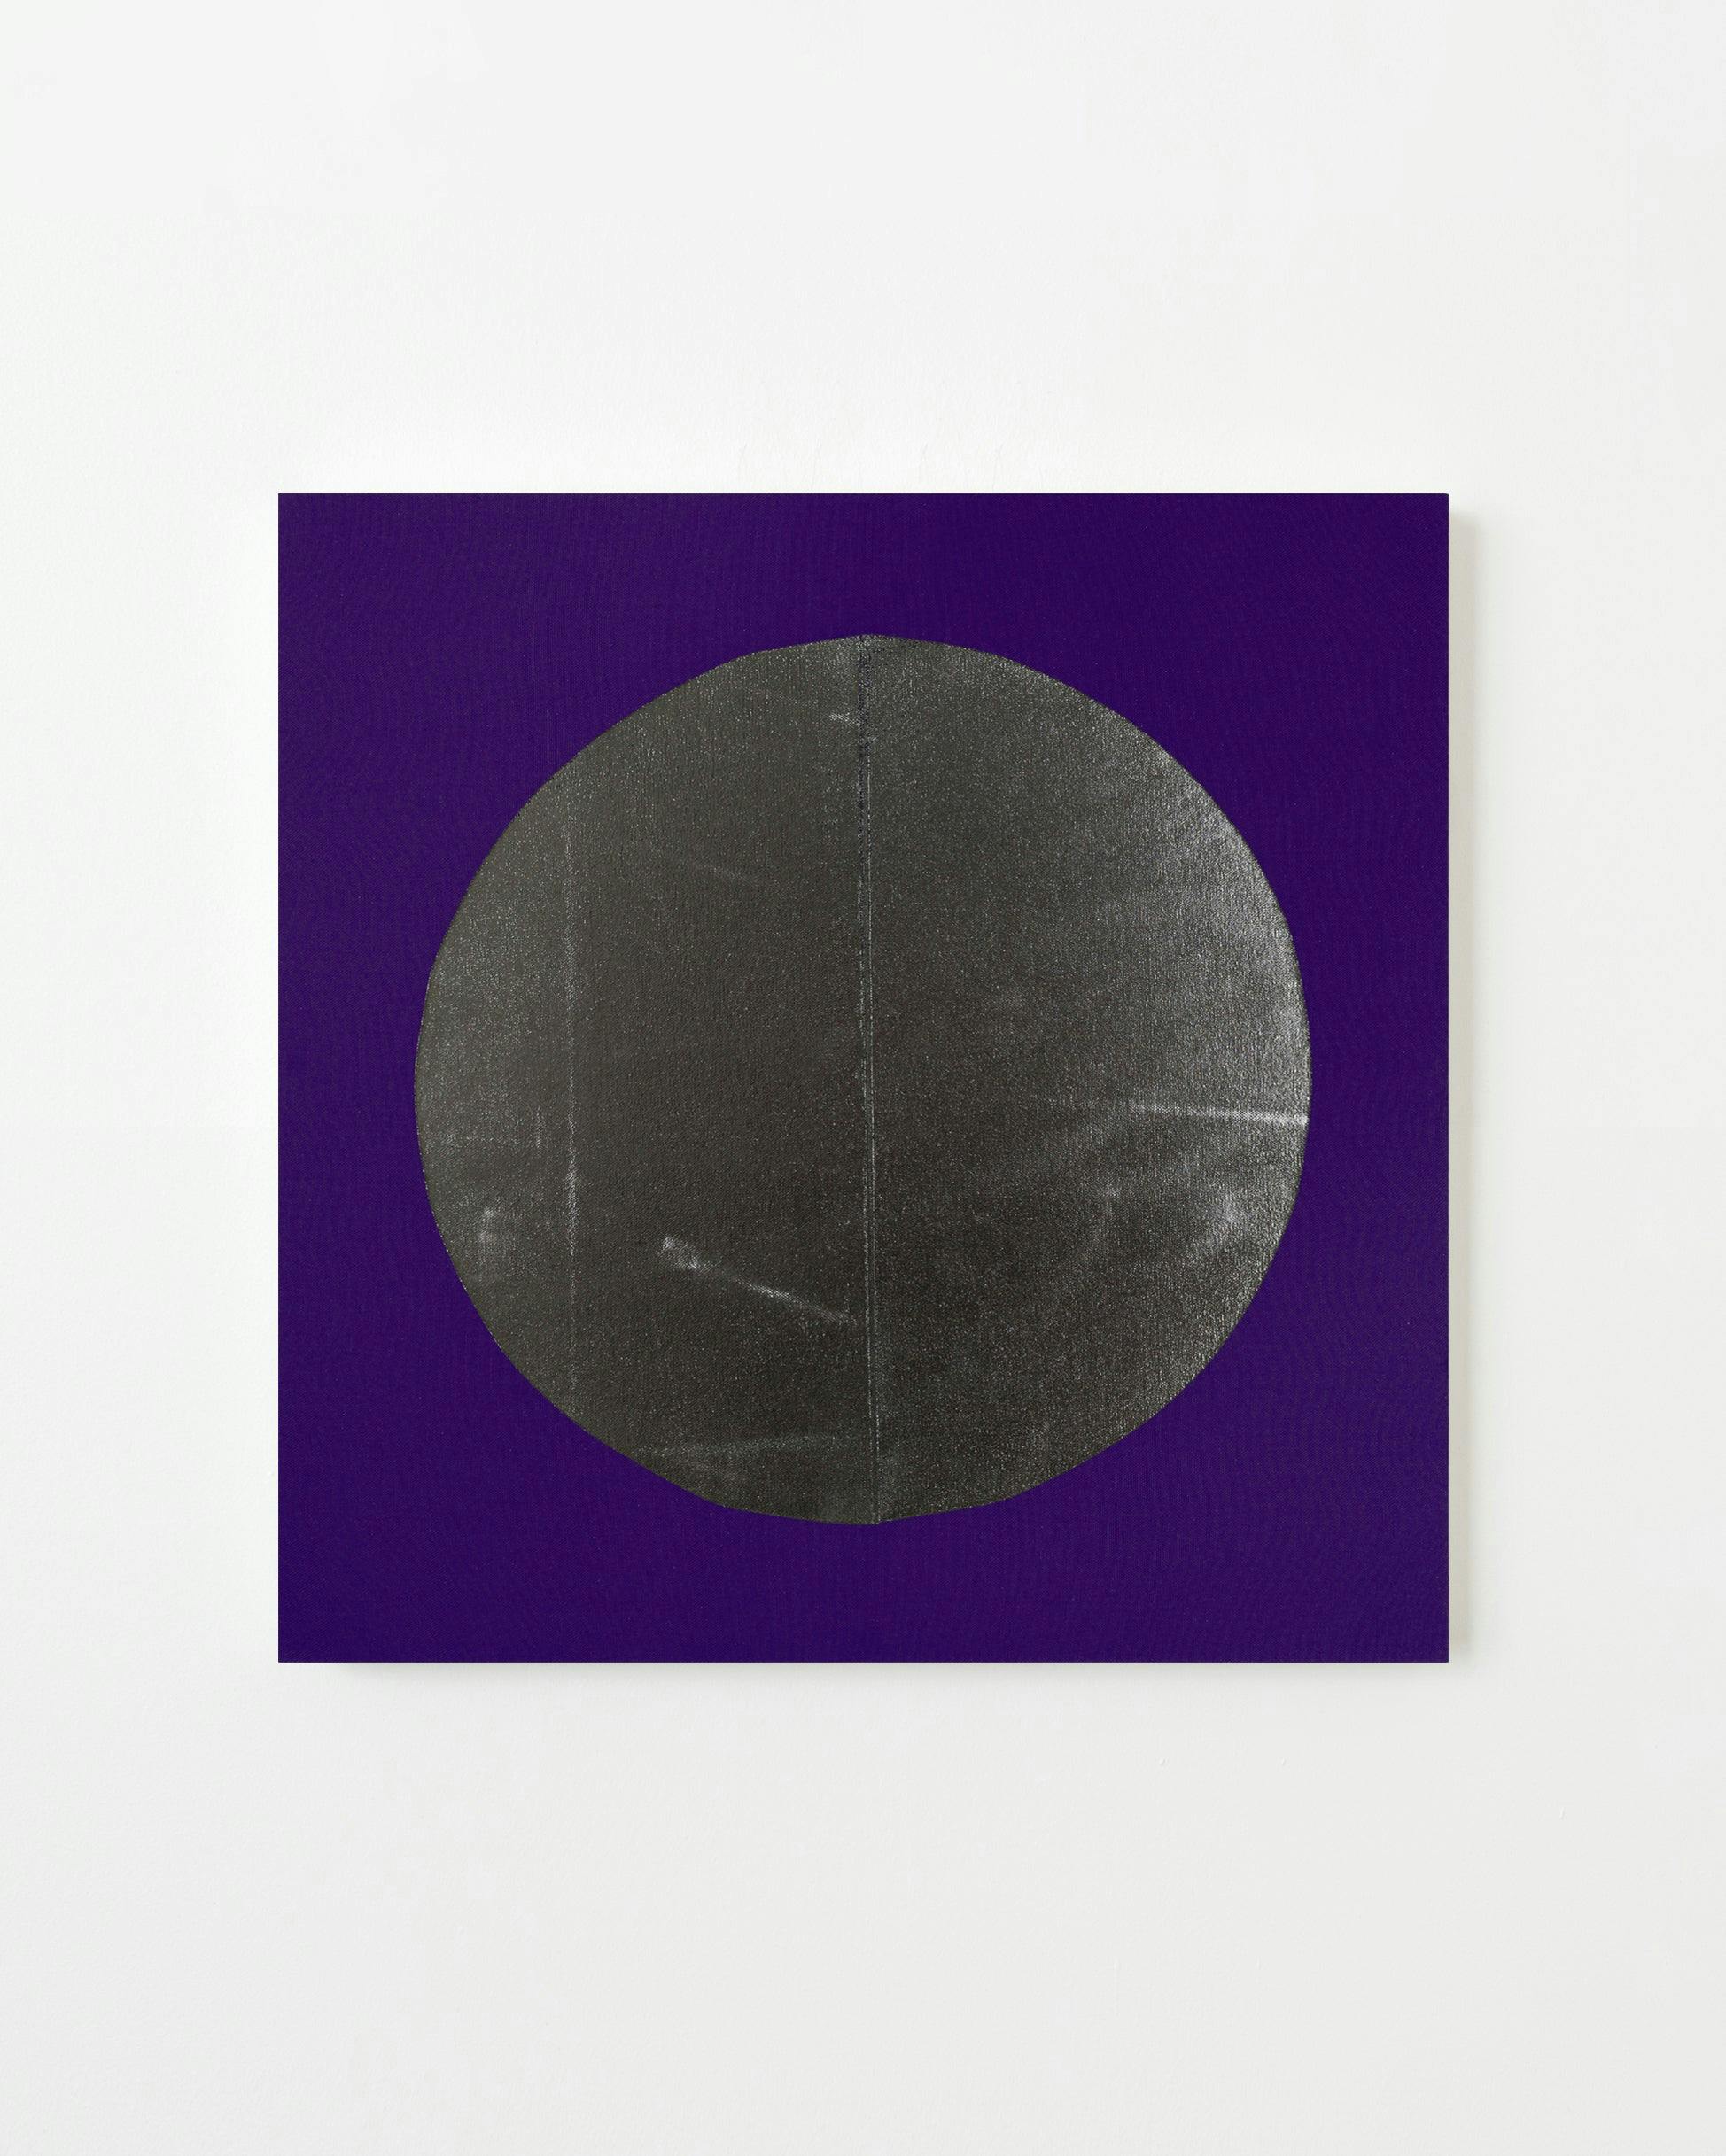 Painting by Chad Kouri titled "Reflection Pool Violet (2x2)".